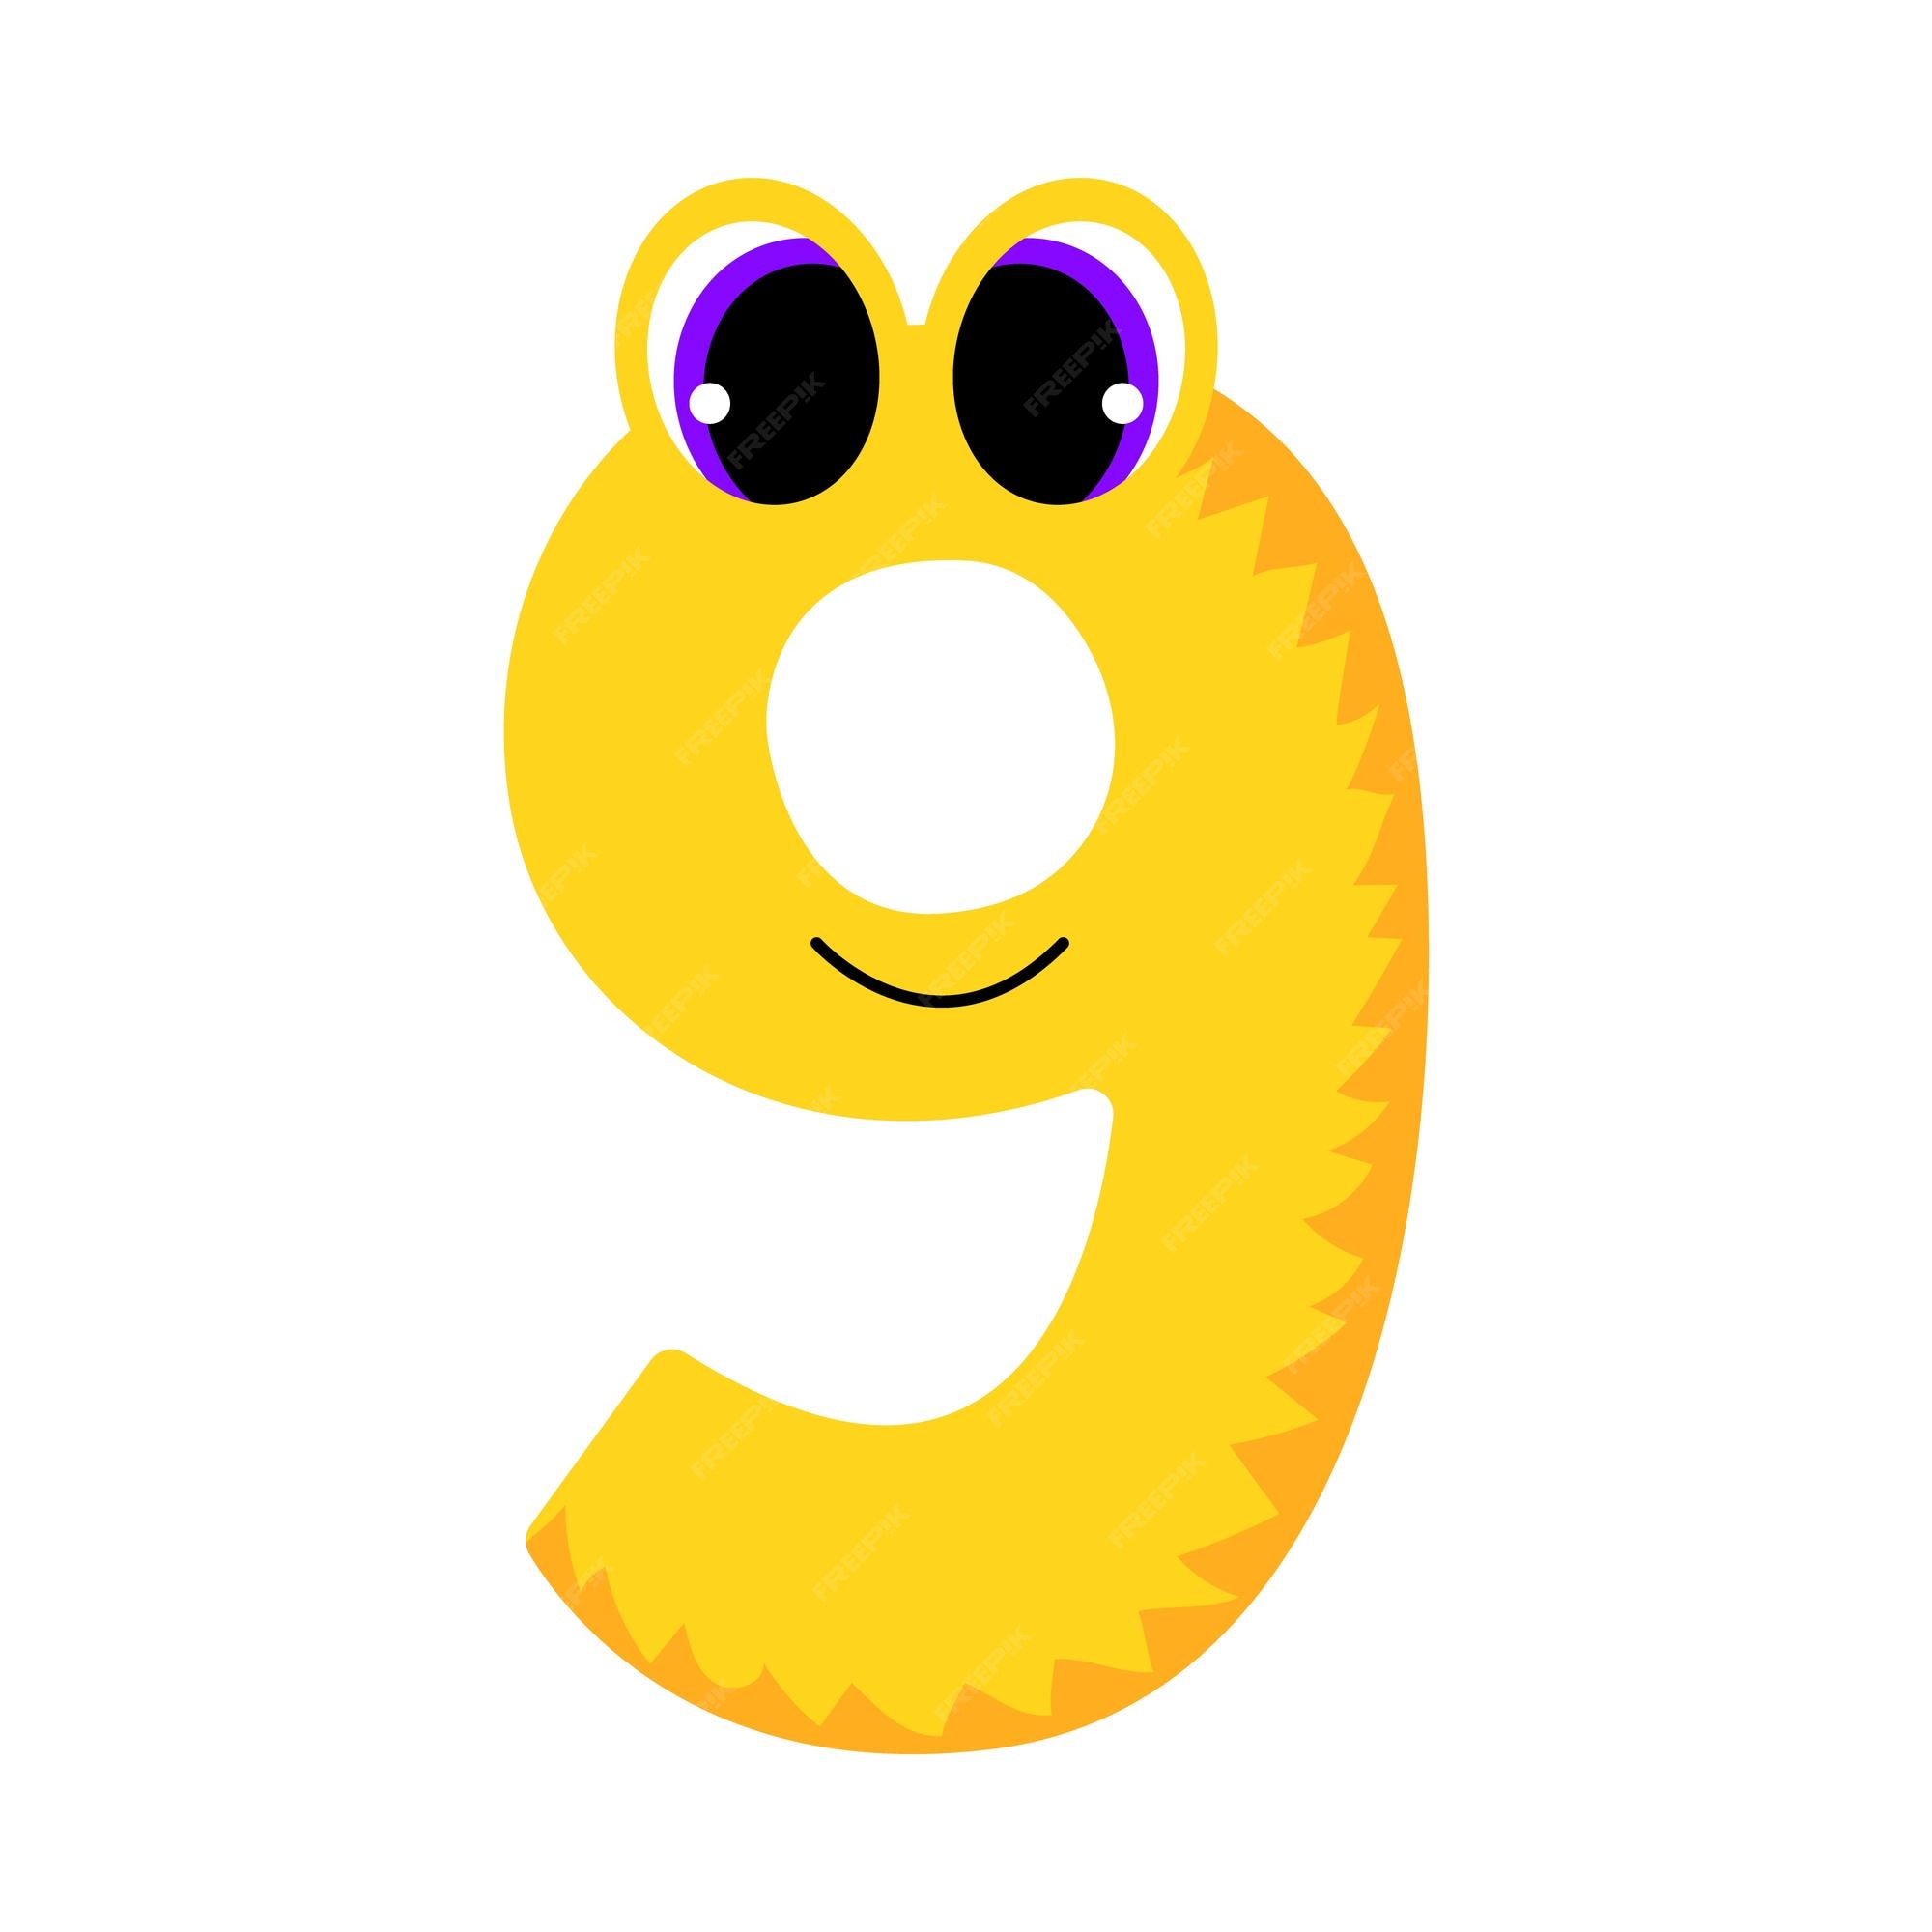 https://img.freepik.com/premium-vector/number-nine-is-form-cute-monster-9-with-eyes-isolated-white-background-vecto_361213-524.jpg?w=2000